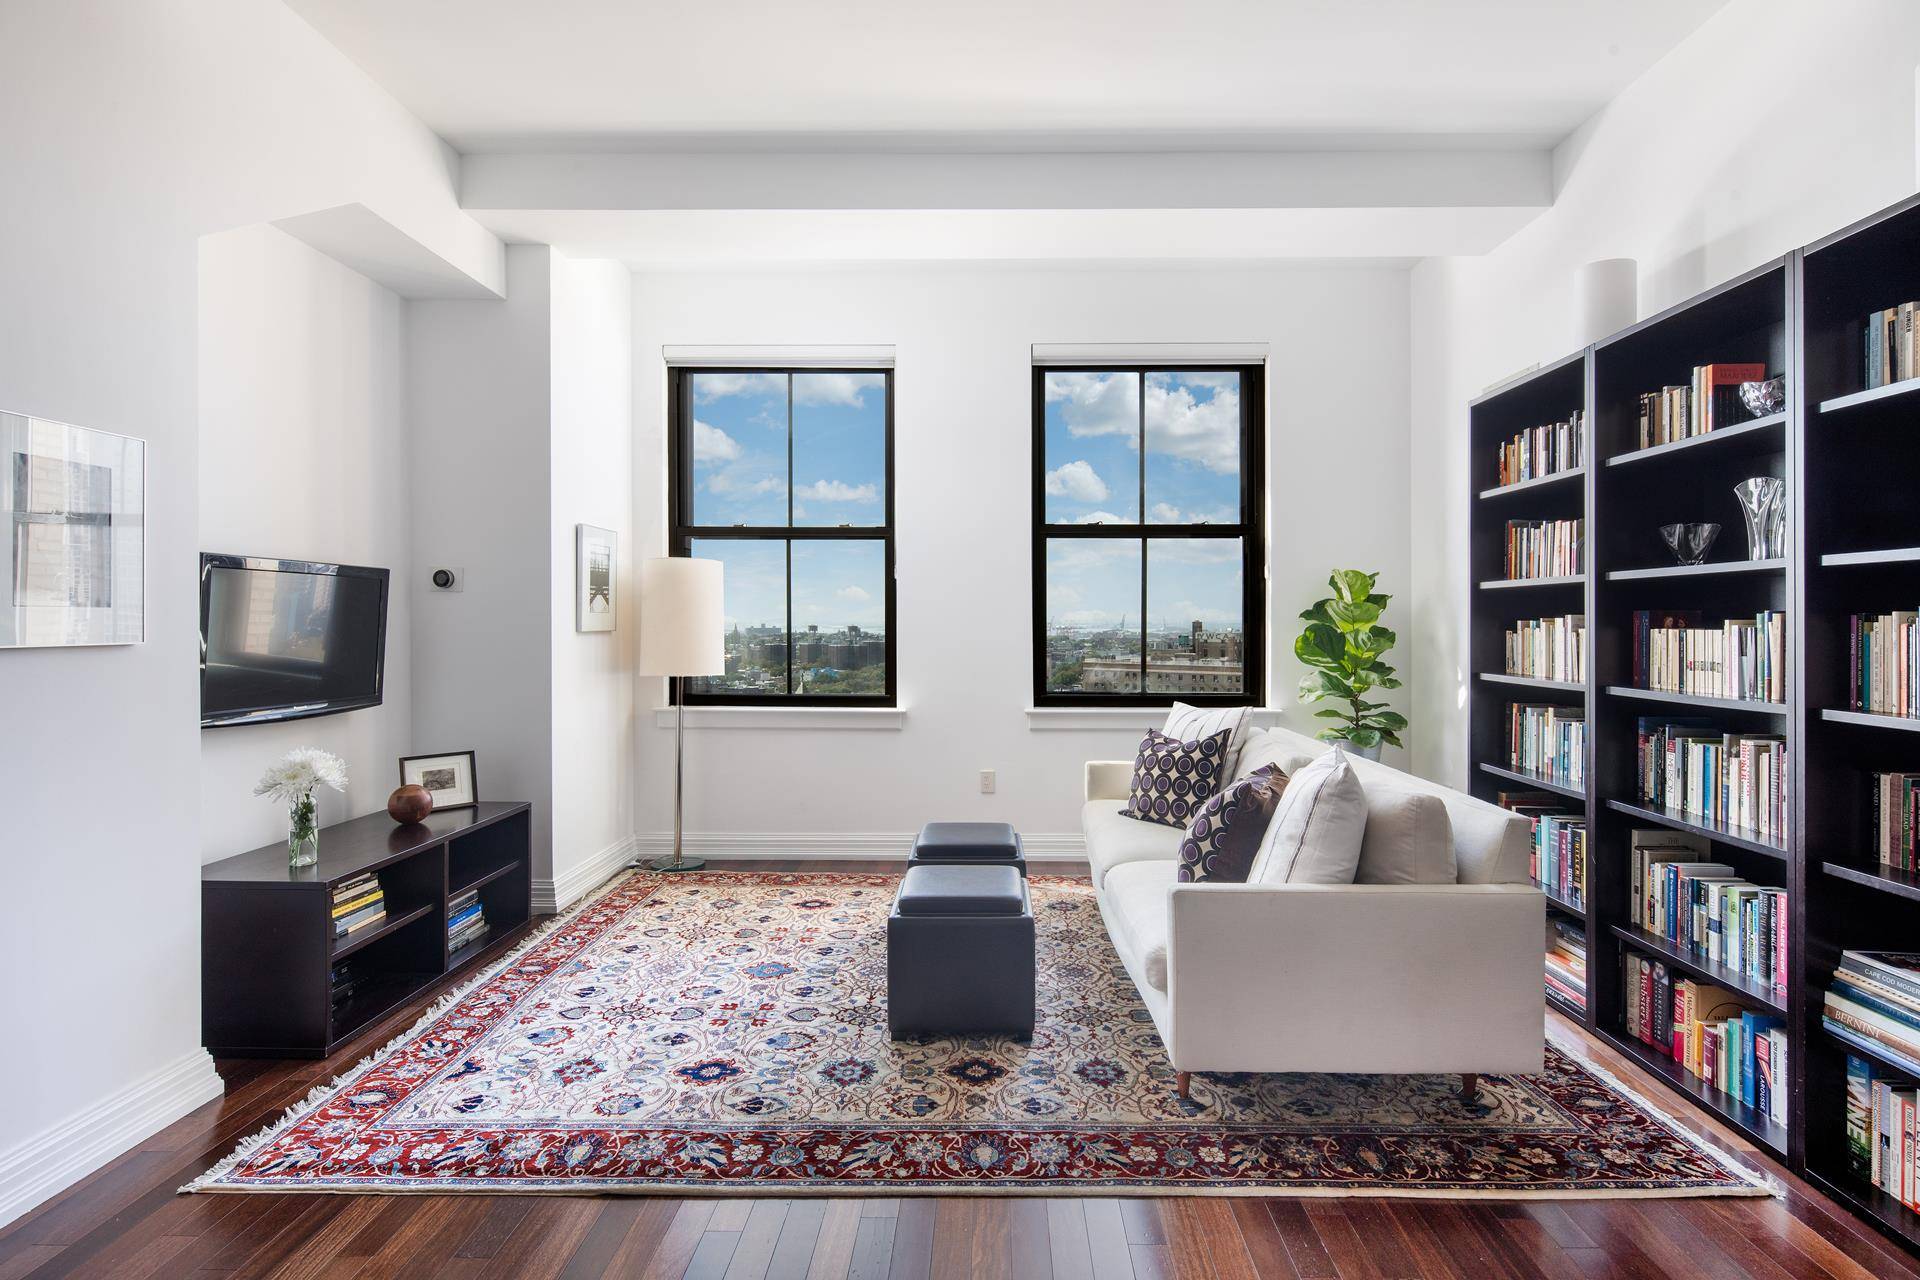 Sophisticated living in Brooklyn's most exciting neighborhood awaits in this spectacular two bedroom with home office, two bathroom Fort Greene condominium featuring expansive interiors and breathtaking, wide open views in ...